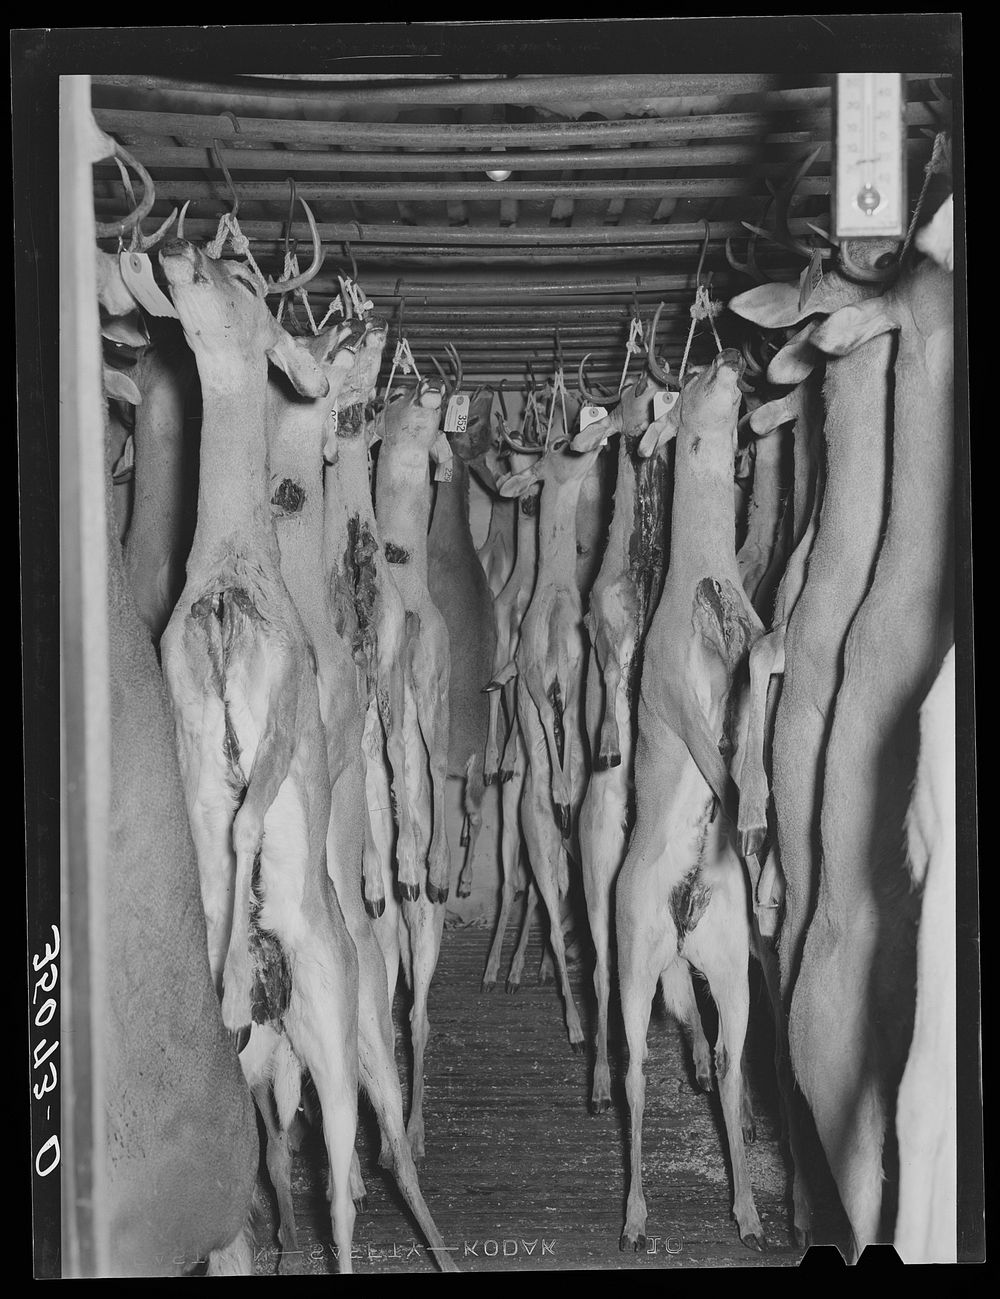 [Untitled photo, possibly related to: Deer shot during the hunting season in cold storage at icehouse. Mason, Texas] by…